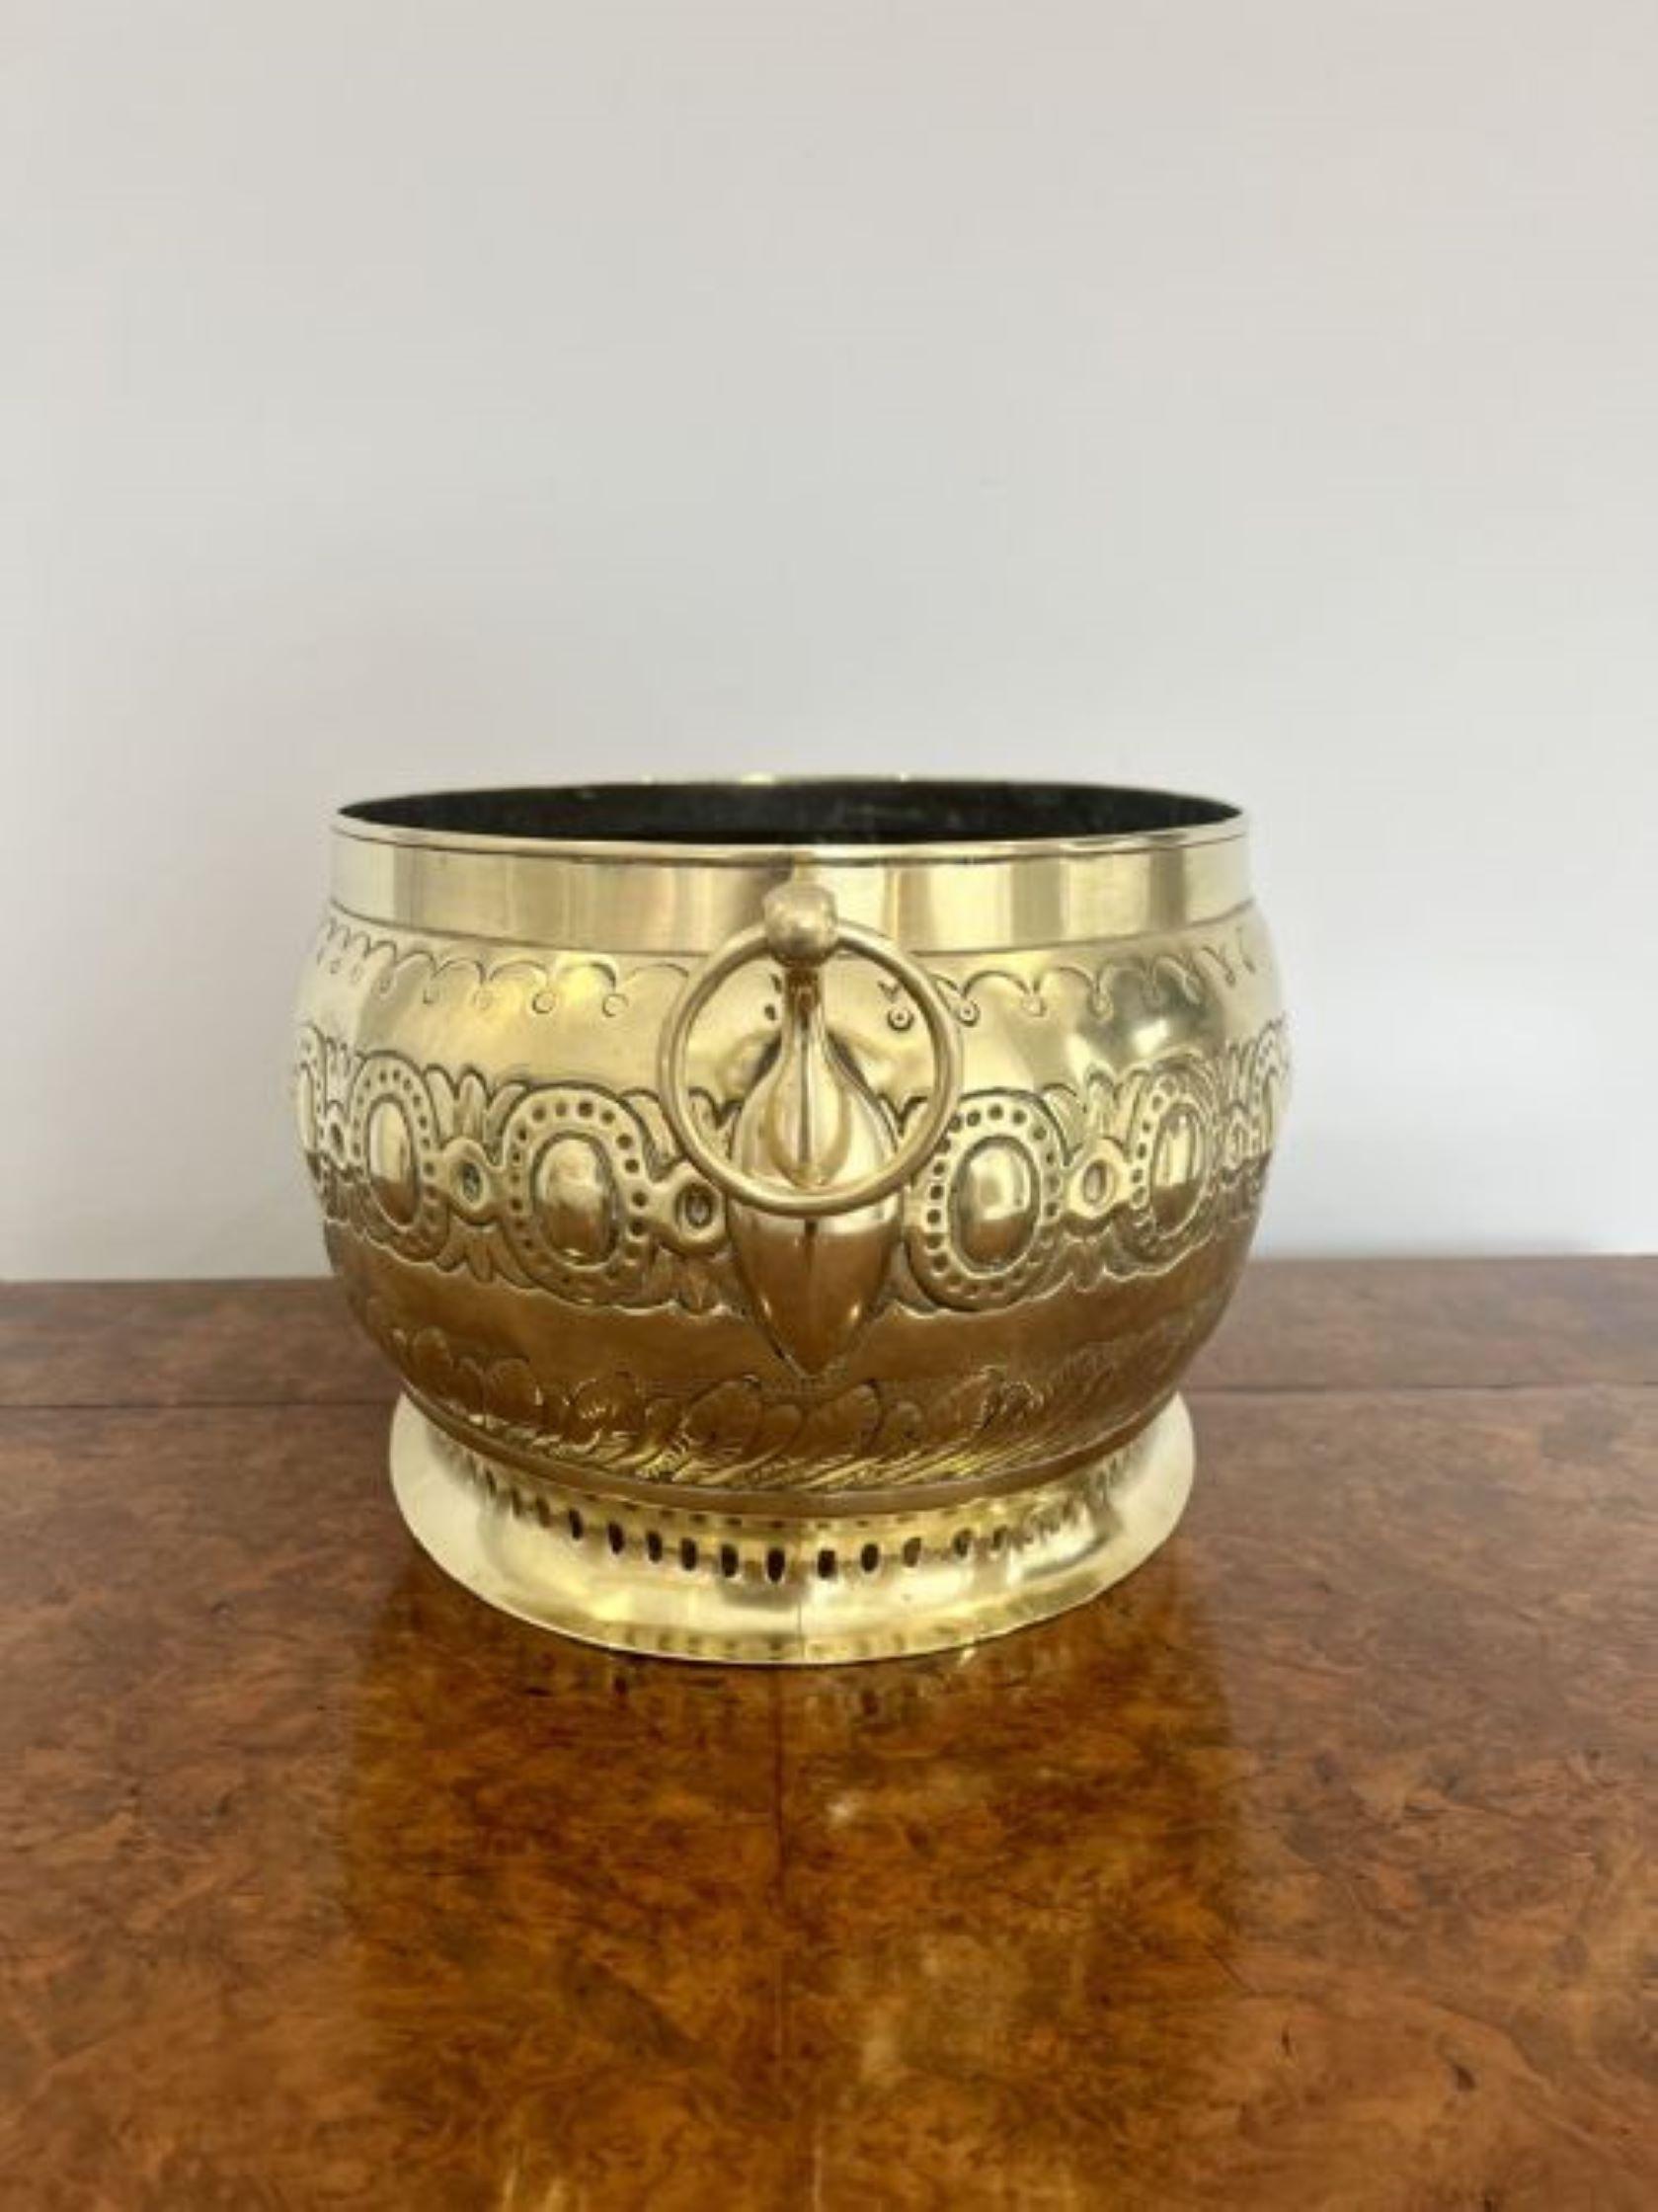 Large antique Victorian quality ornate brass wine cooler having a large oval antique Victorian quality brass wine cooler with ornate engraved decoration with carrying handles to both sides standing on a oval base.